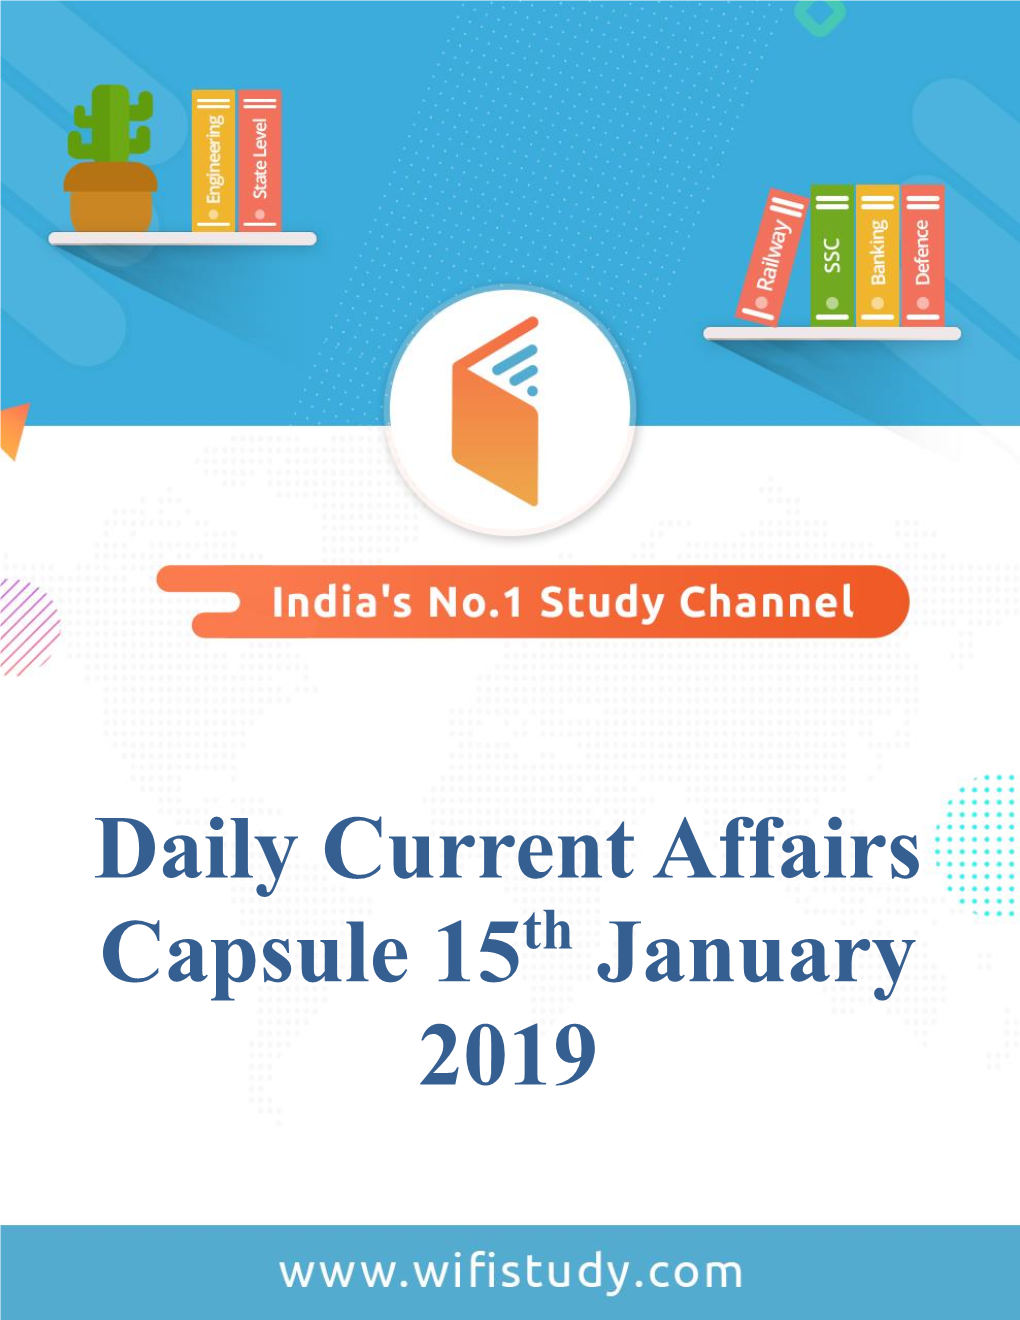 Daily Current Affairs Capsule 15 January 2019